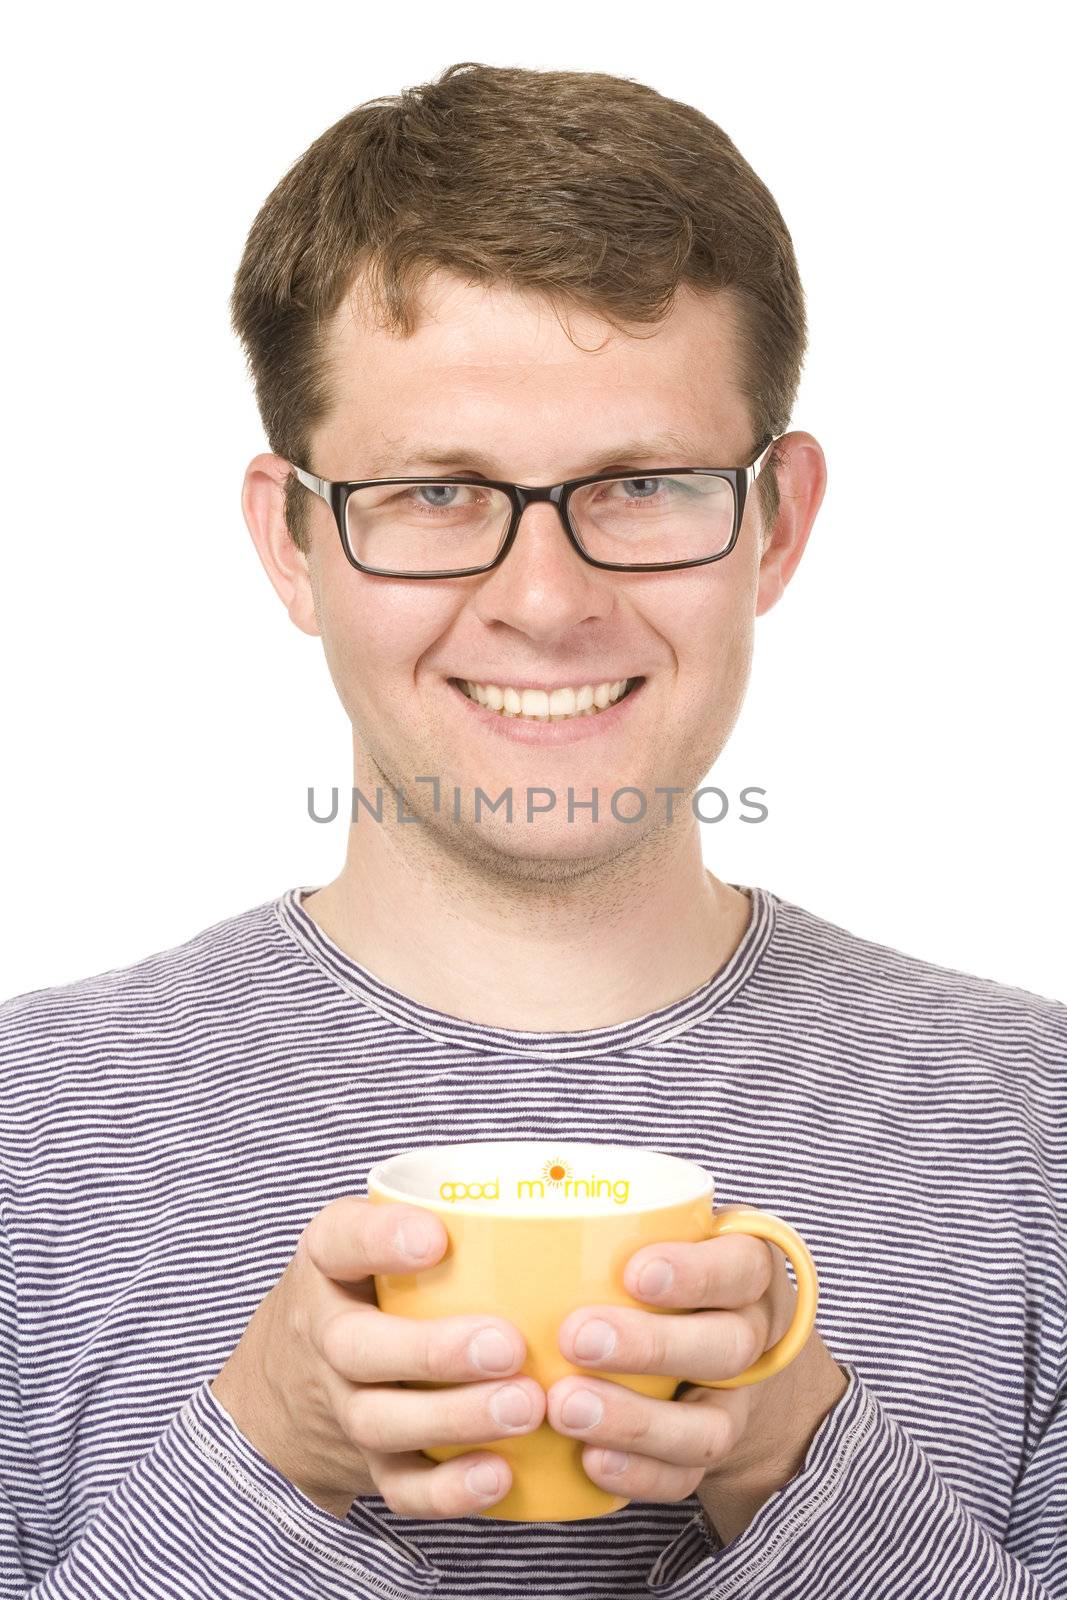 A smiling man with a yellow cup  titled "Good morning"